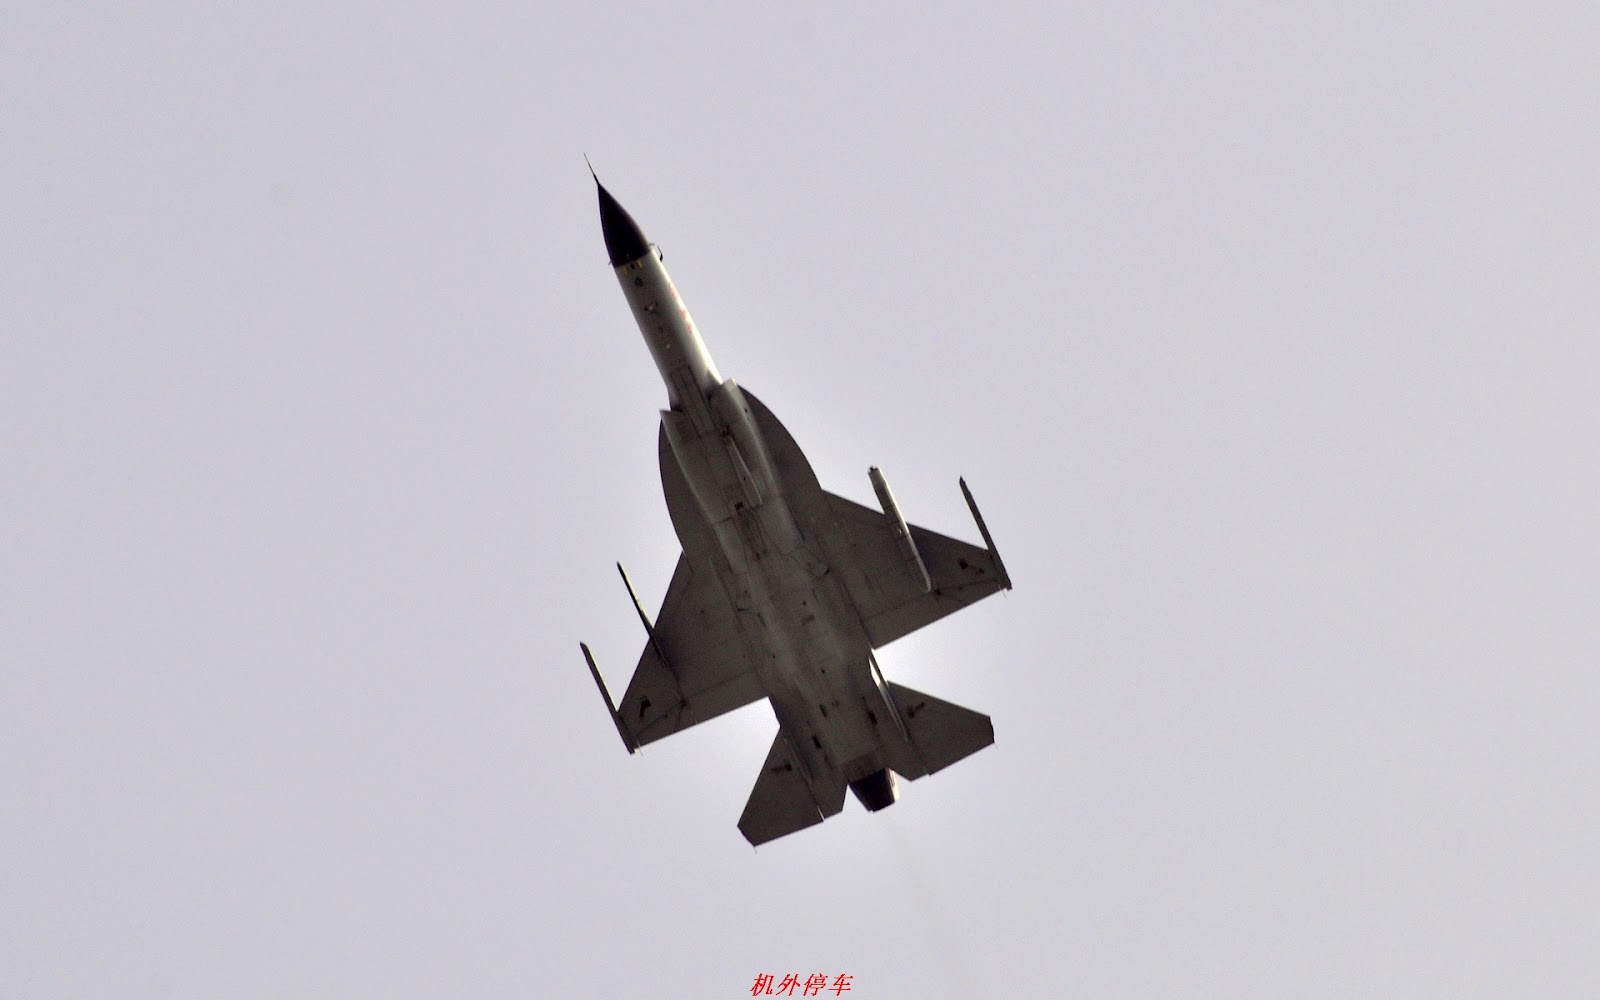 FC-1+JF-17+Thunder+Xiaolong+Fighter+electro+optical+targeting+system+eots+pod+for+fighter+jets+WMD-7+laser-designator+targeting+pod+block+I+II+III+IV+1+2+3+4+PAF+PLAAF+Pakistan+air+force+chinese+china++%25283%2529.jpg